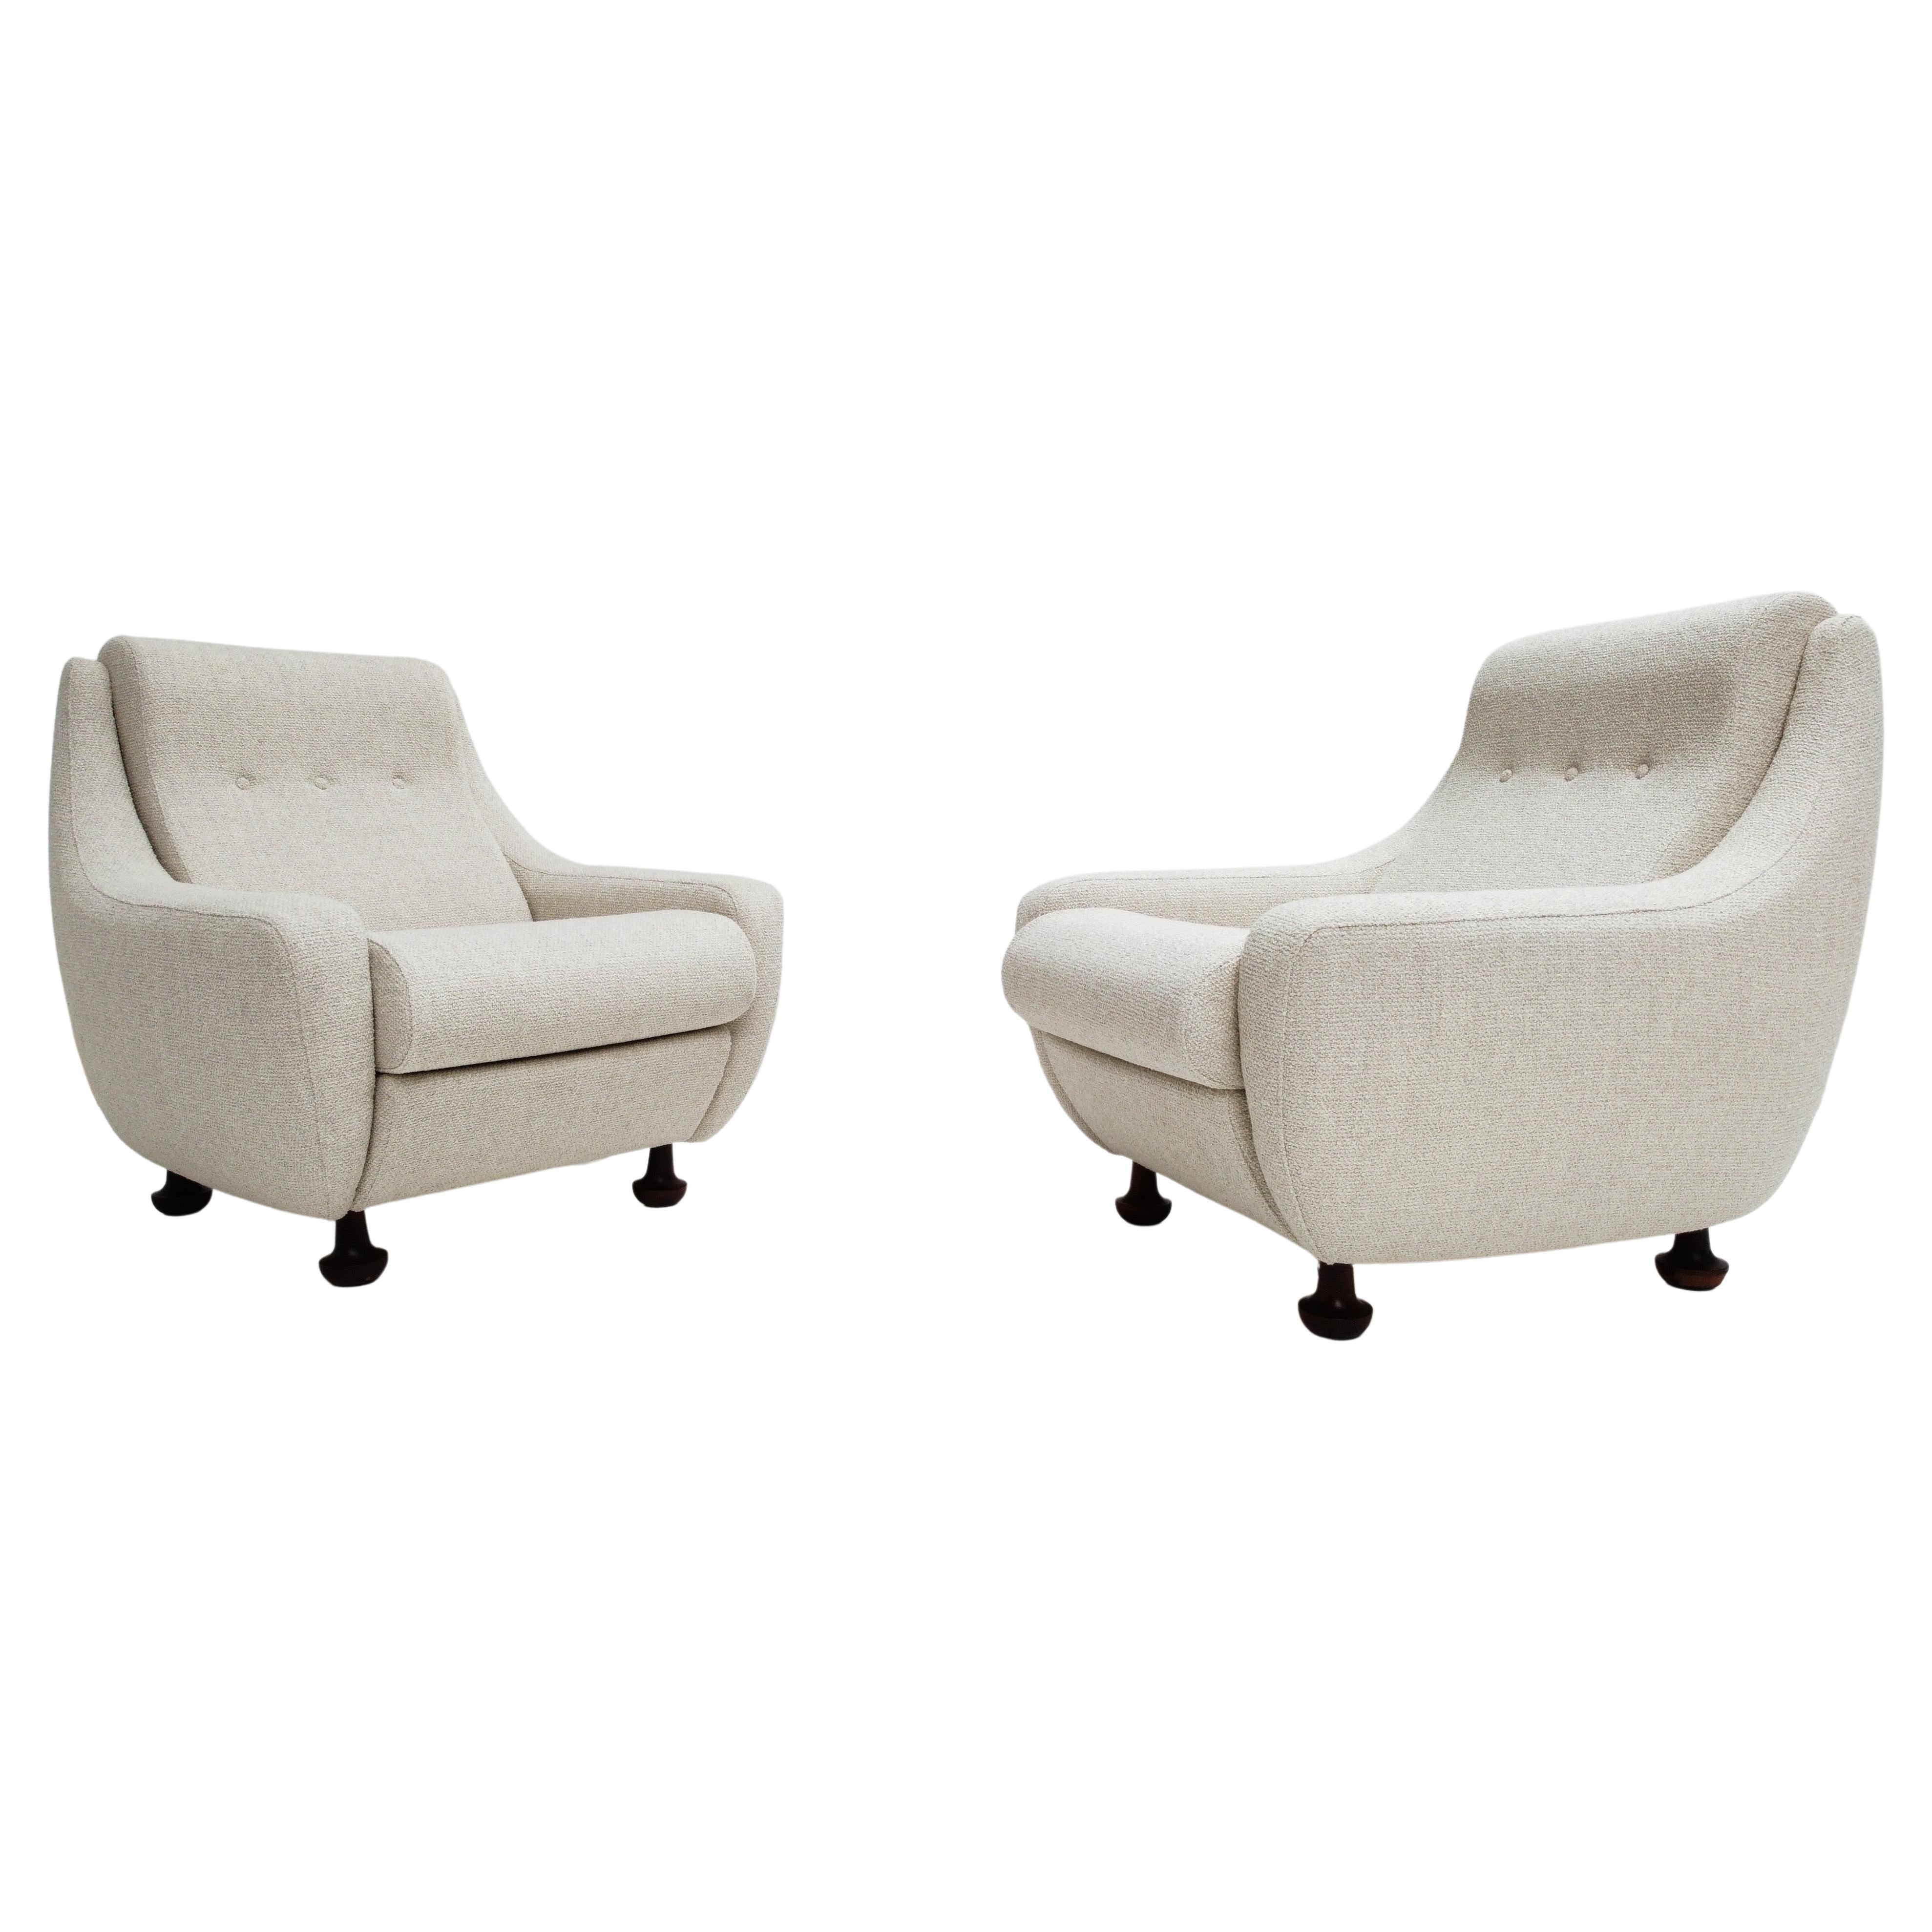 Pair of Rare 60's Organic Curved Lounge Chairs by Airborne France New Upholstery For Sale